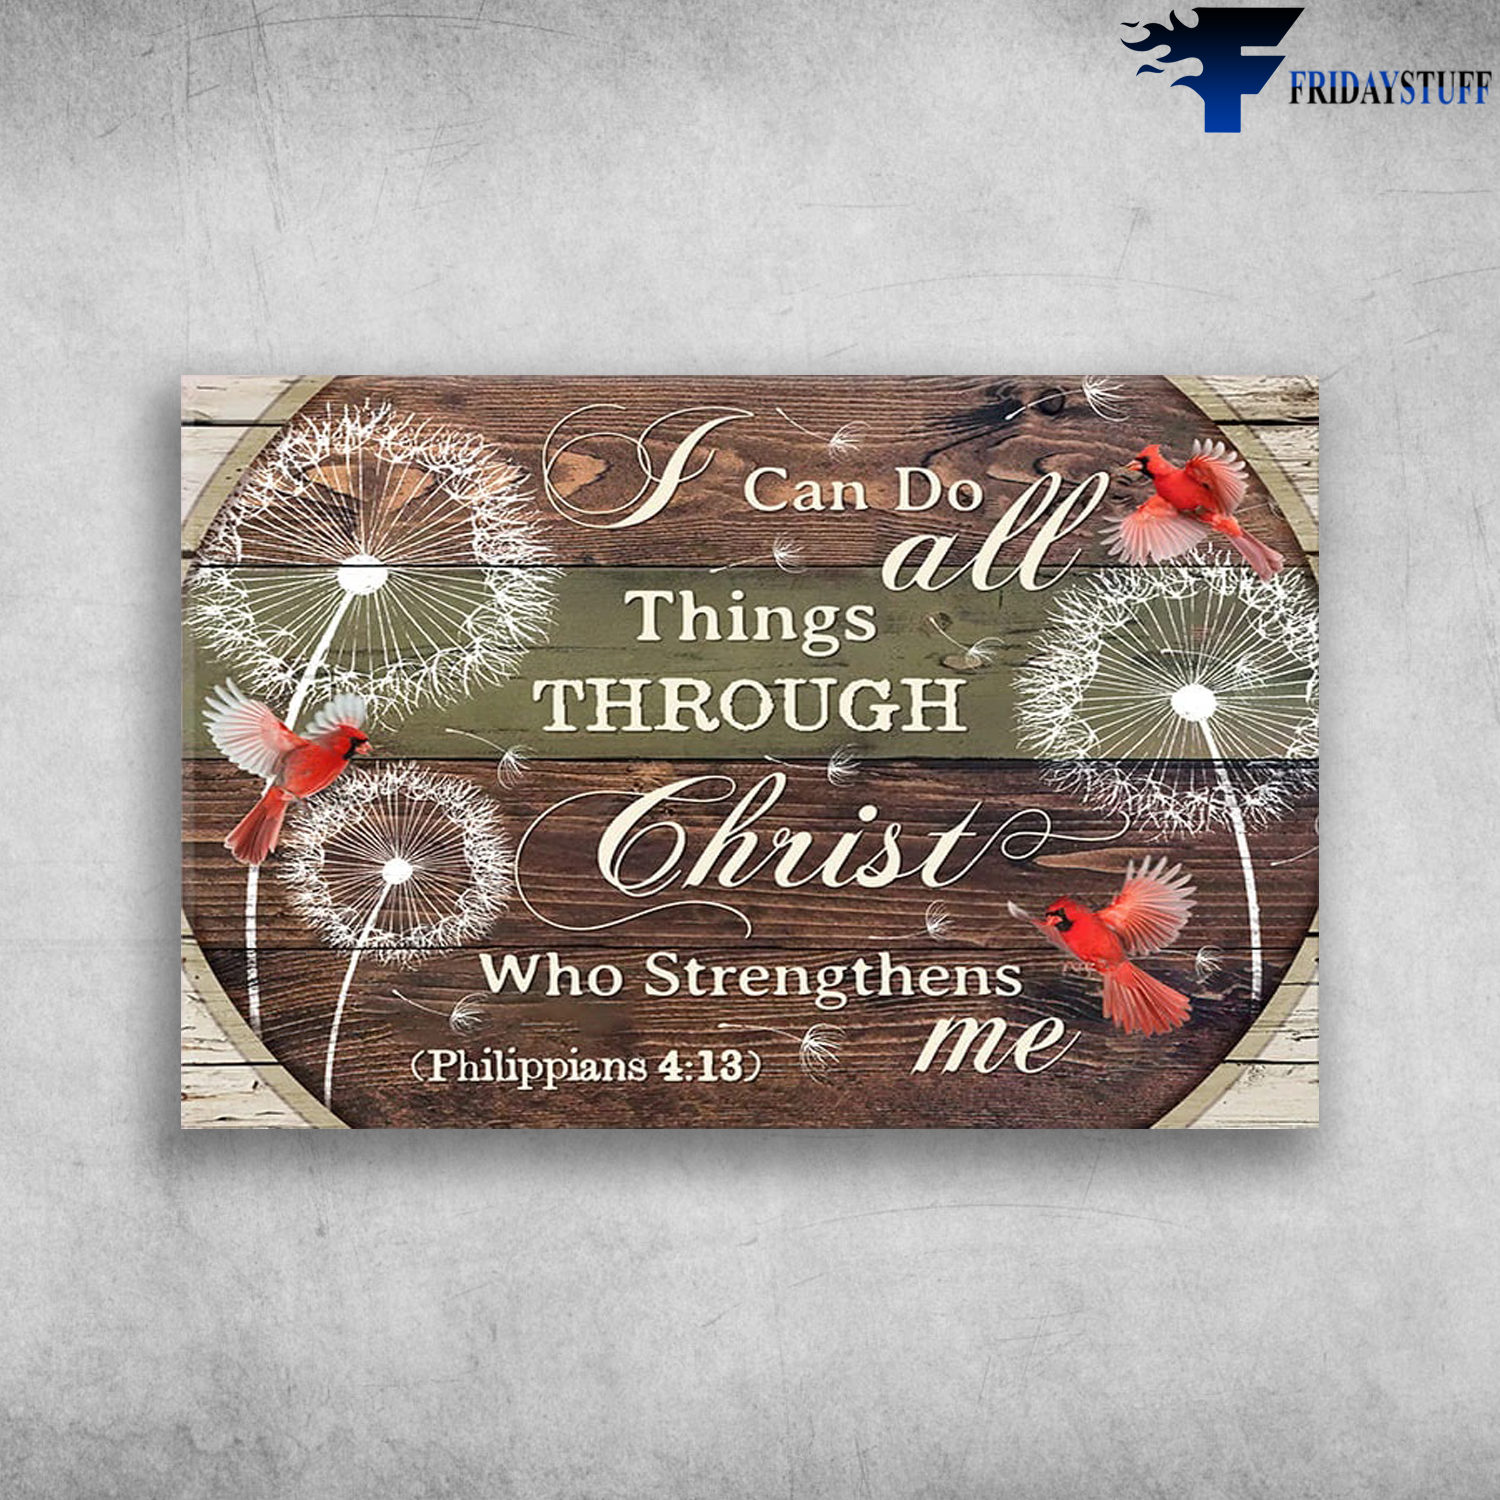 Cardinal Bird - I Can DO All Things Through Christ, Who Strengthens Me, Philippians 4.13